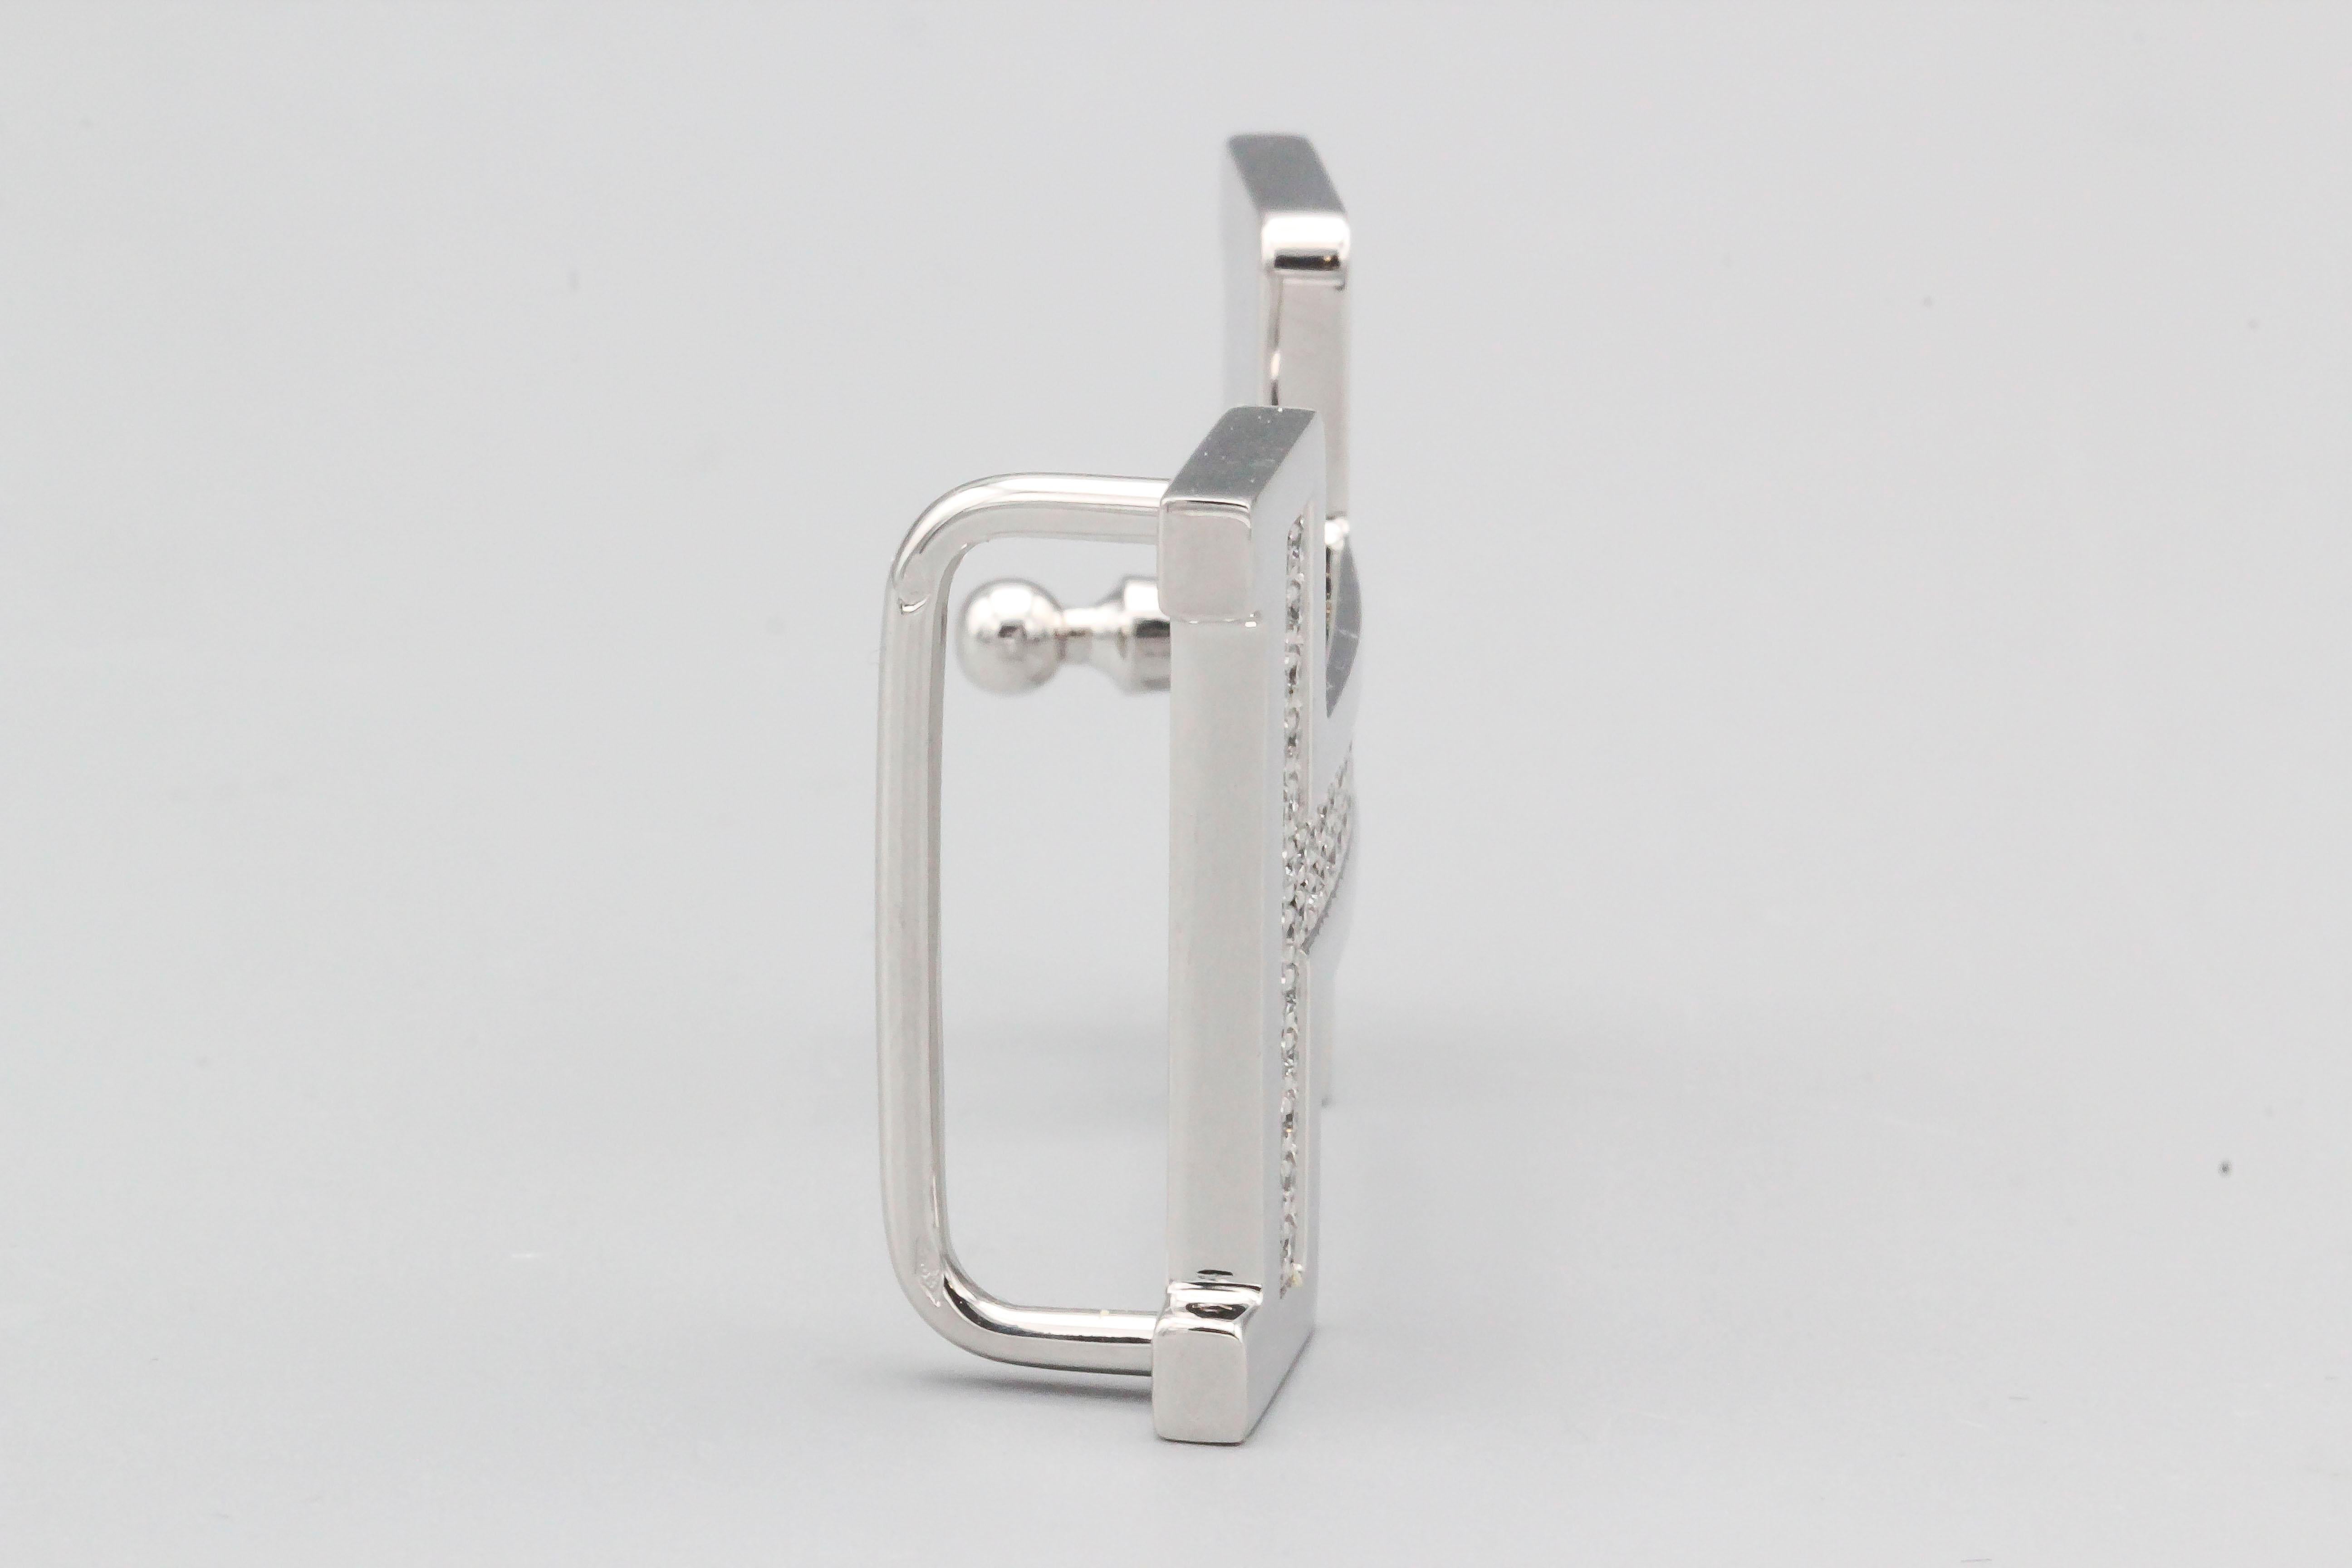 Fine diamond and 18K white gold belt buckle by Hermes. It features the letter 